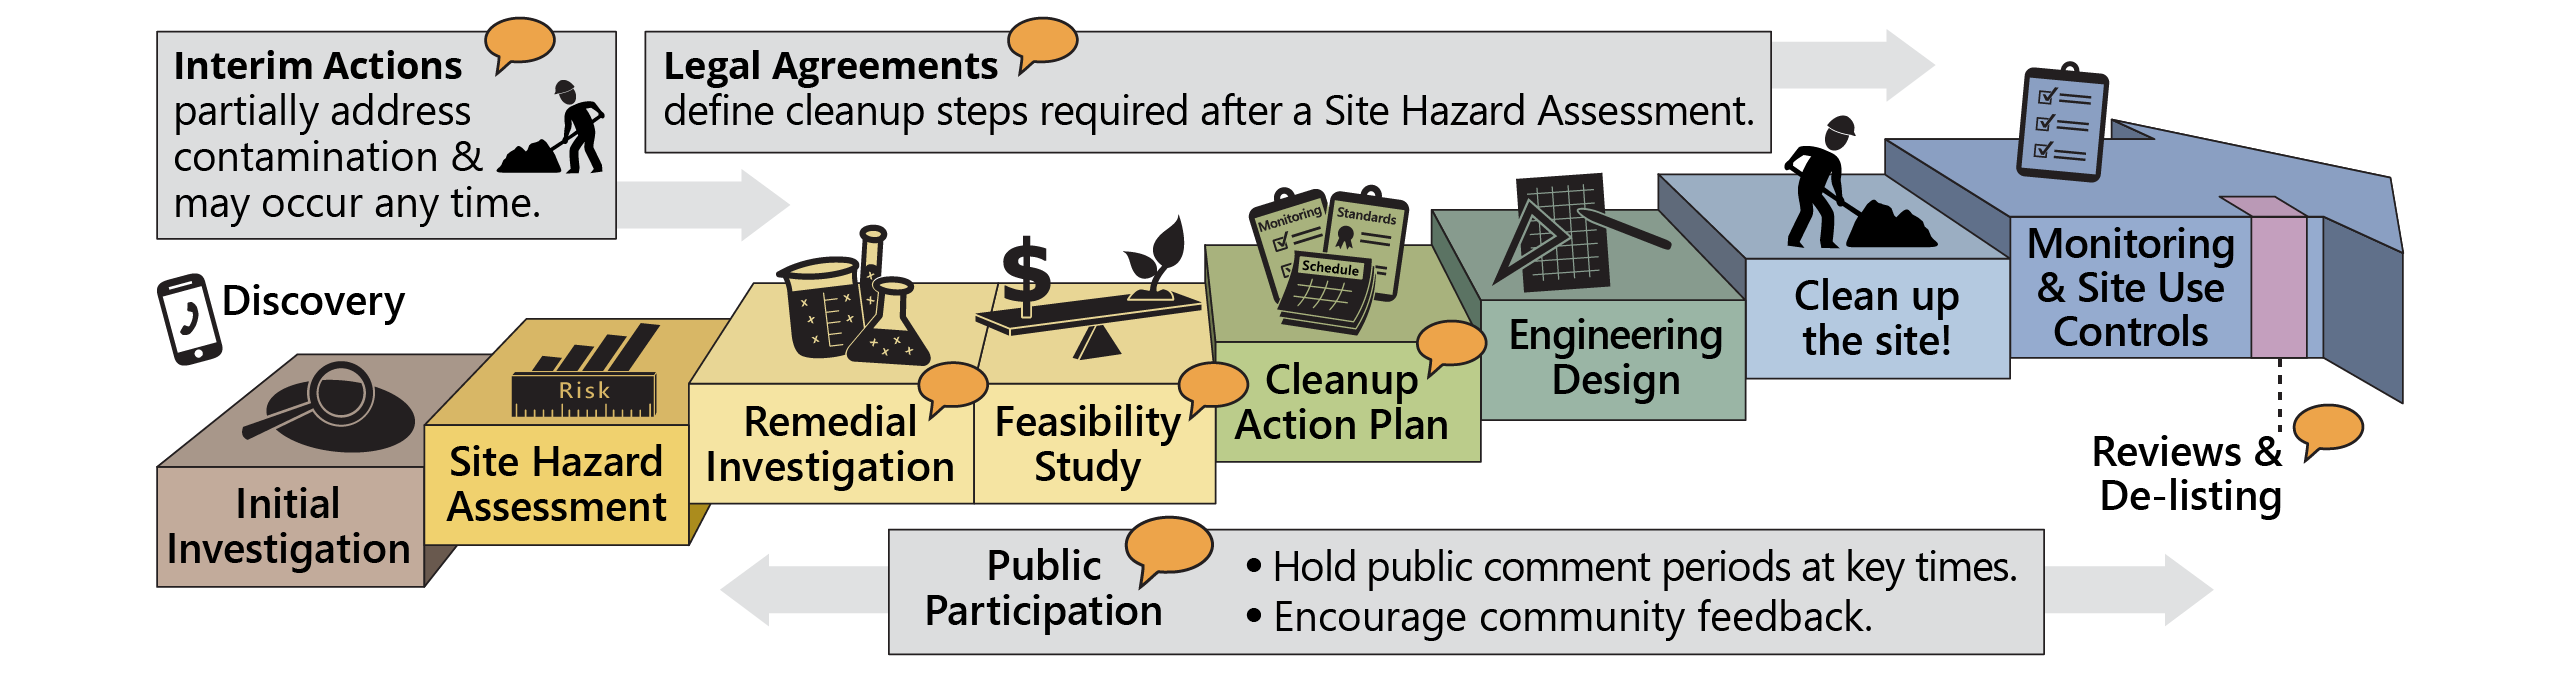 Visit the link for a text description of the steps in the cleanup process.